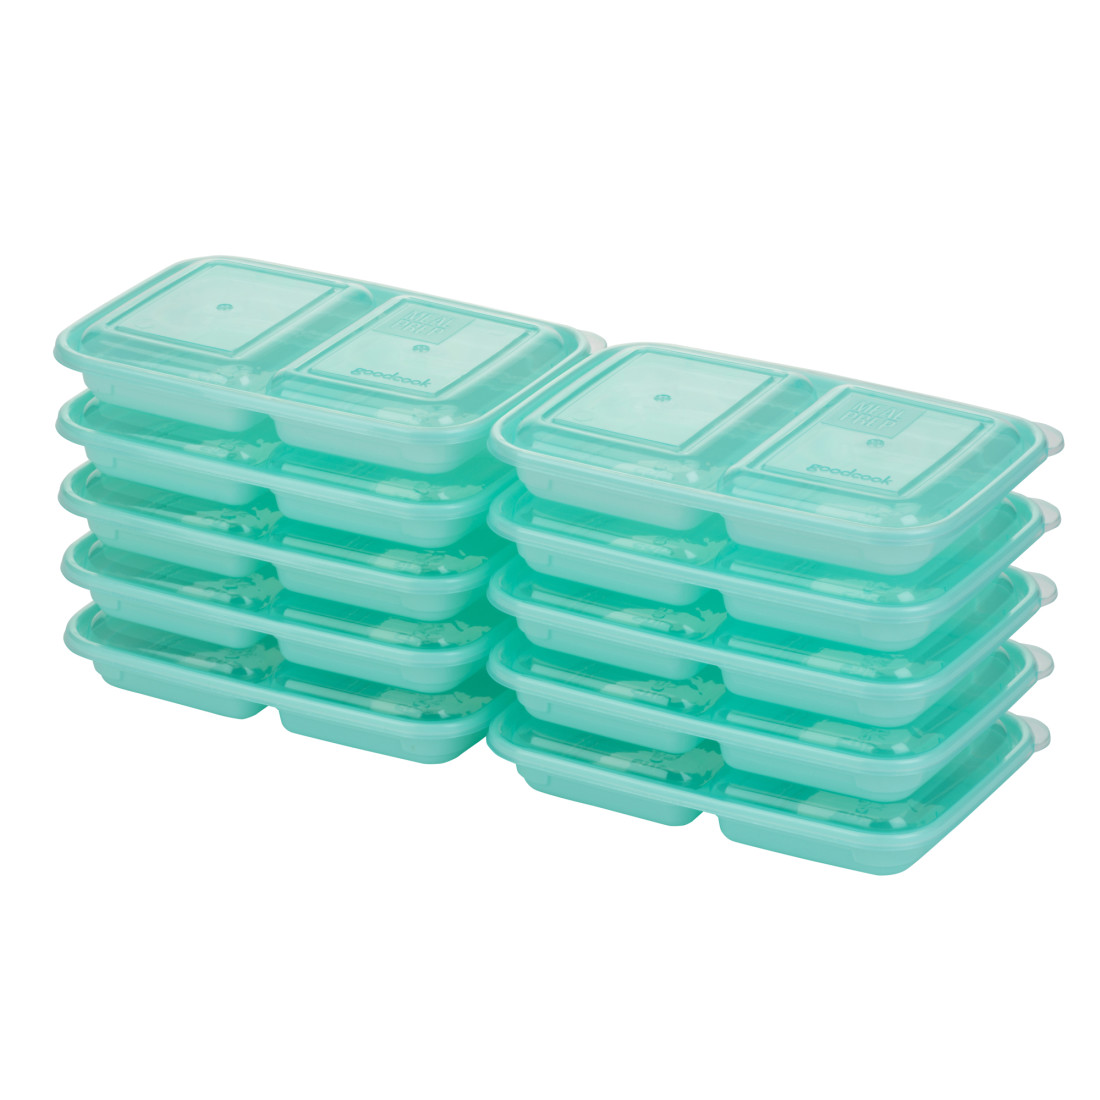 Meal Prep 2 Compartments Snack, 10-Piece Set - GoodCook